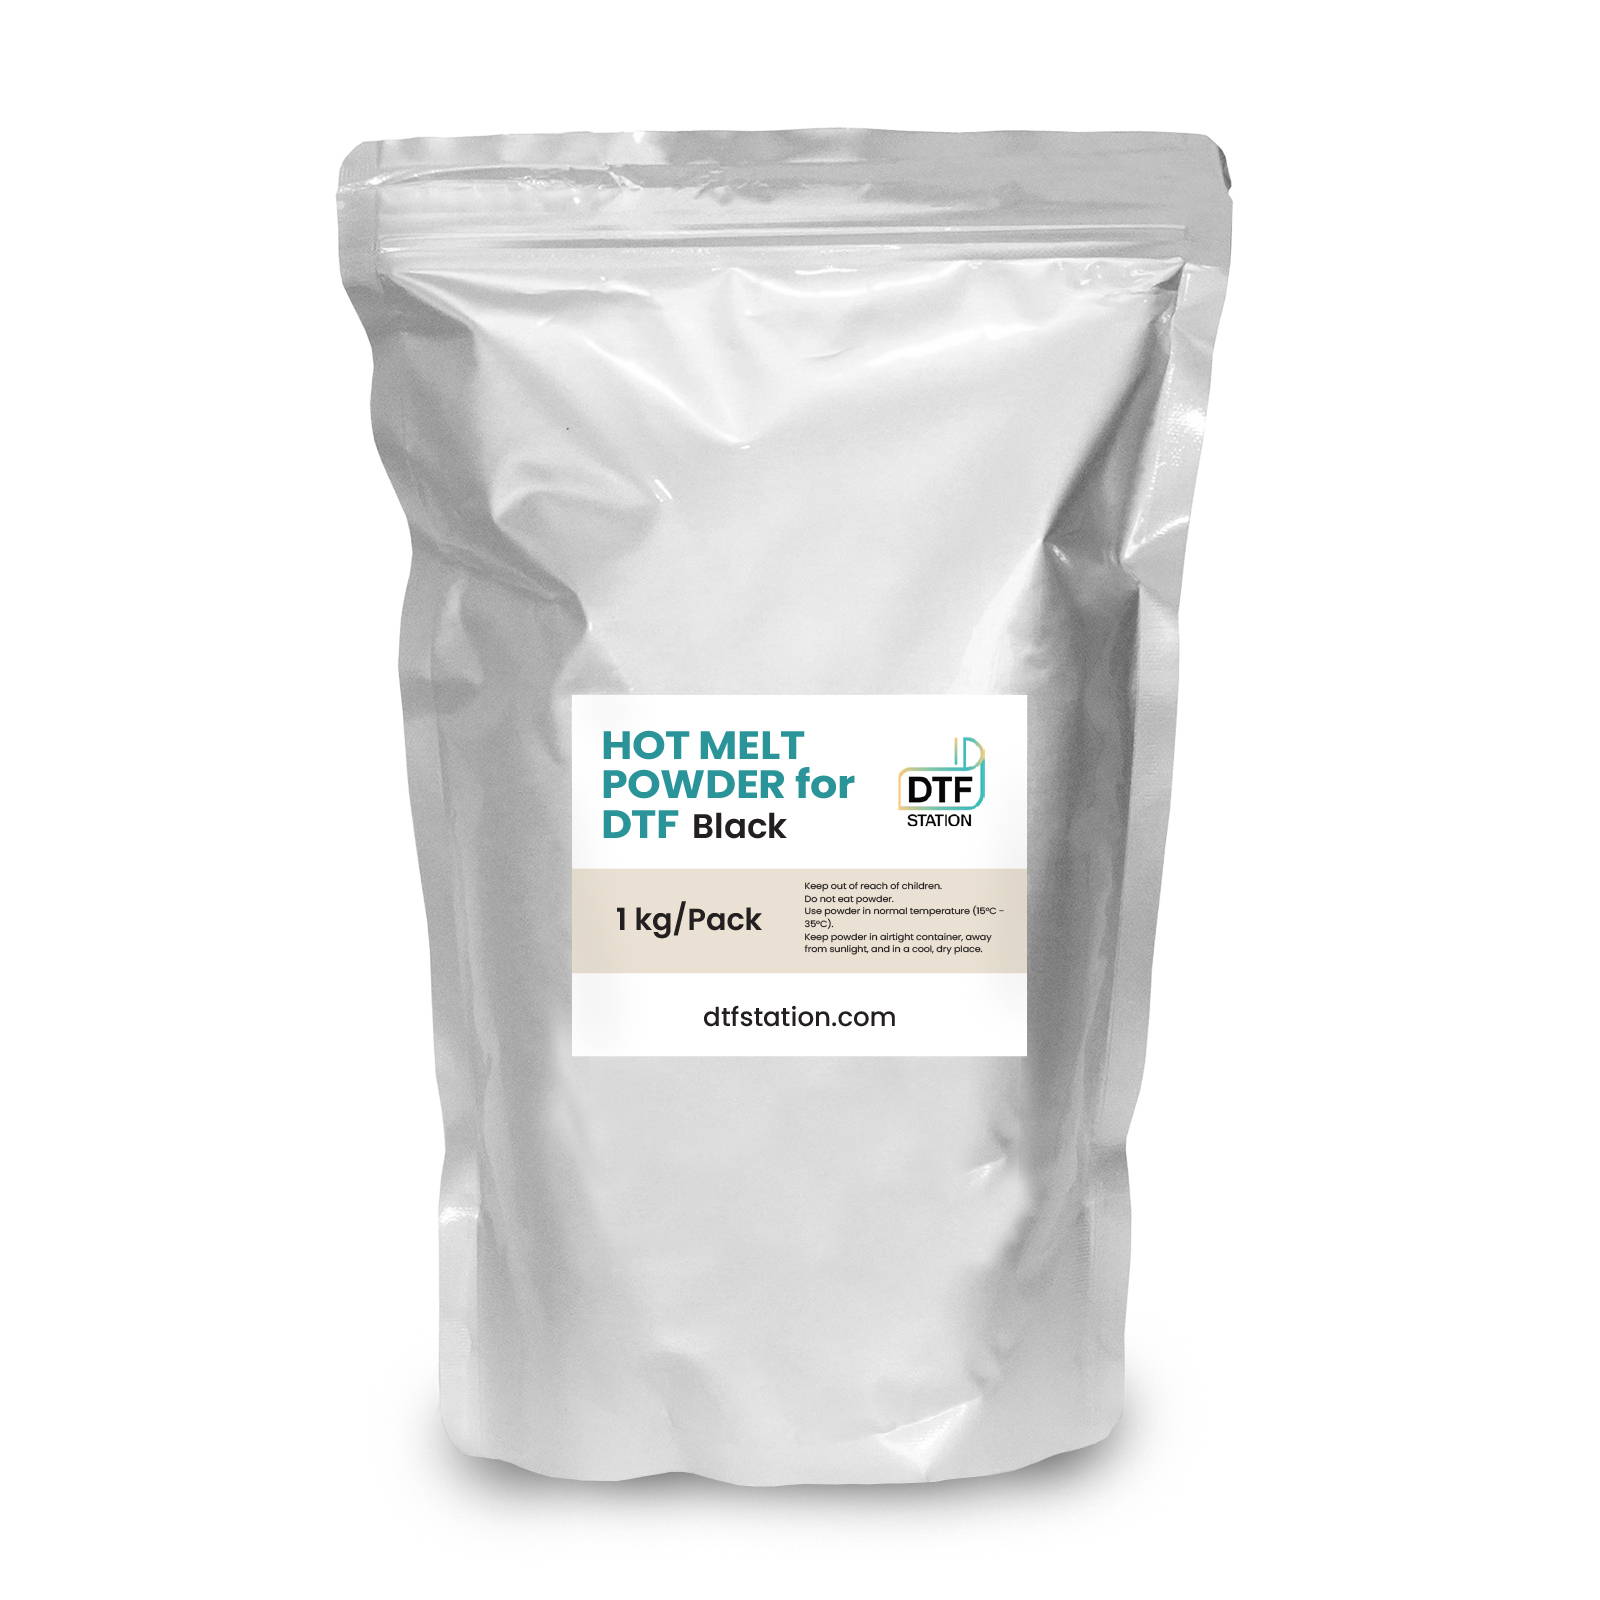 Formulated for use during DTG Transfer (DTF), DTF Station adhesive powder is a crucial part of any DTF printing pipeline. Cover your DTG Transfer media with this powder to allow for optimal press. Use for 100% cotton, polyester, nylon, and more!